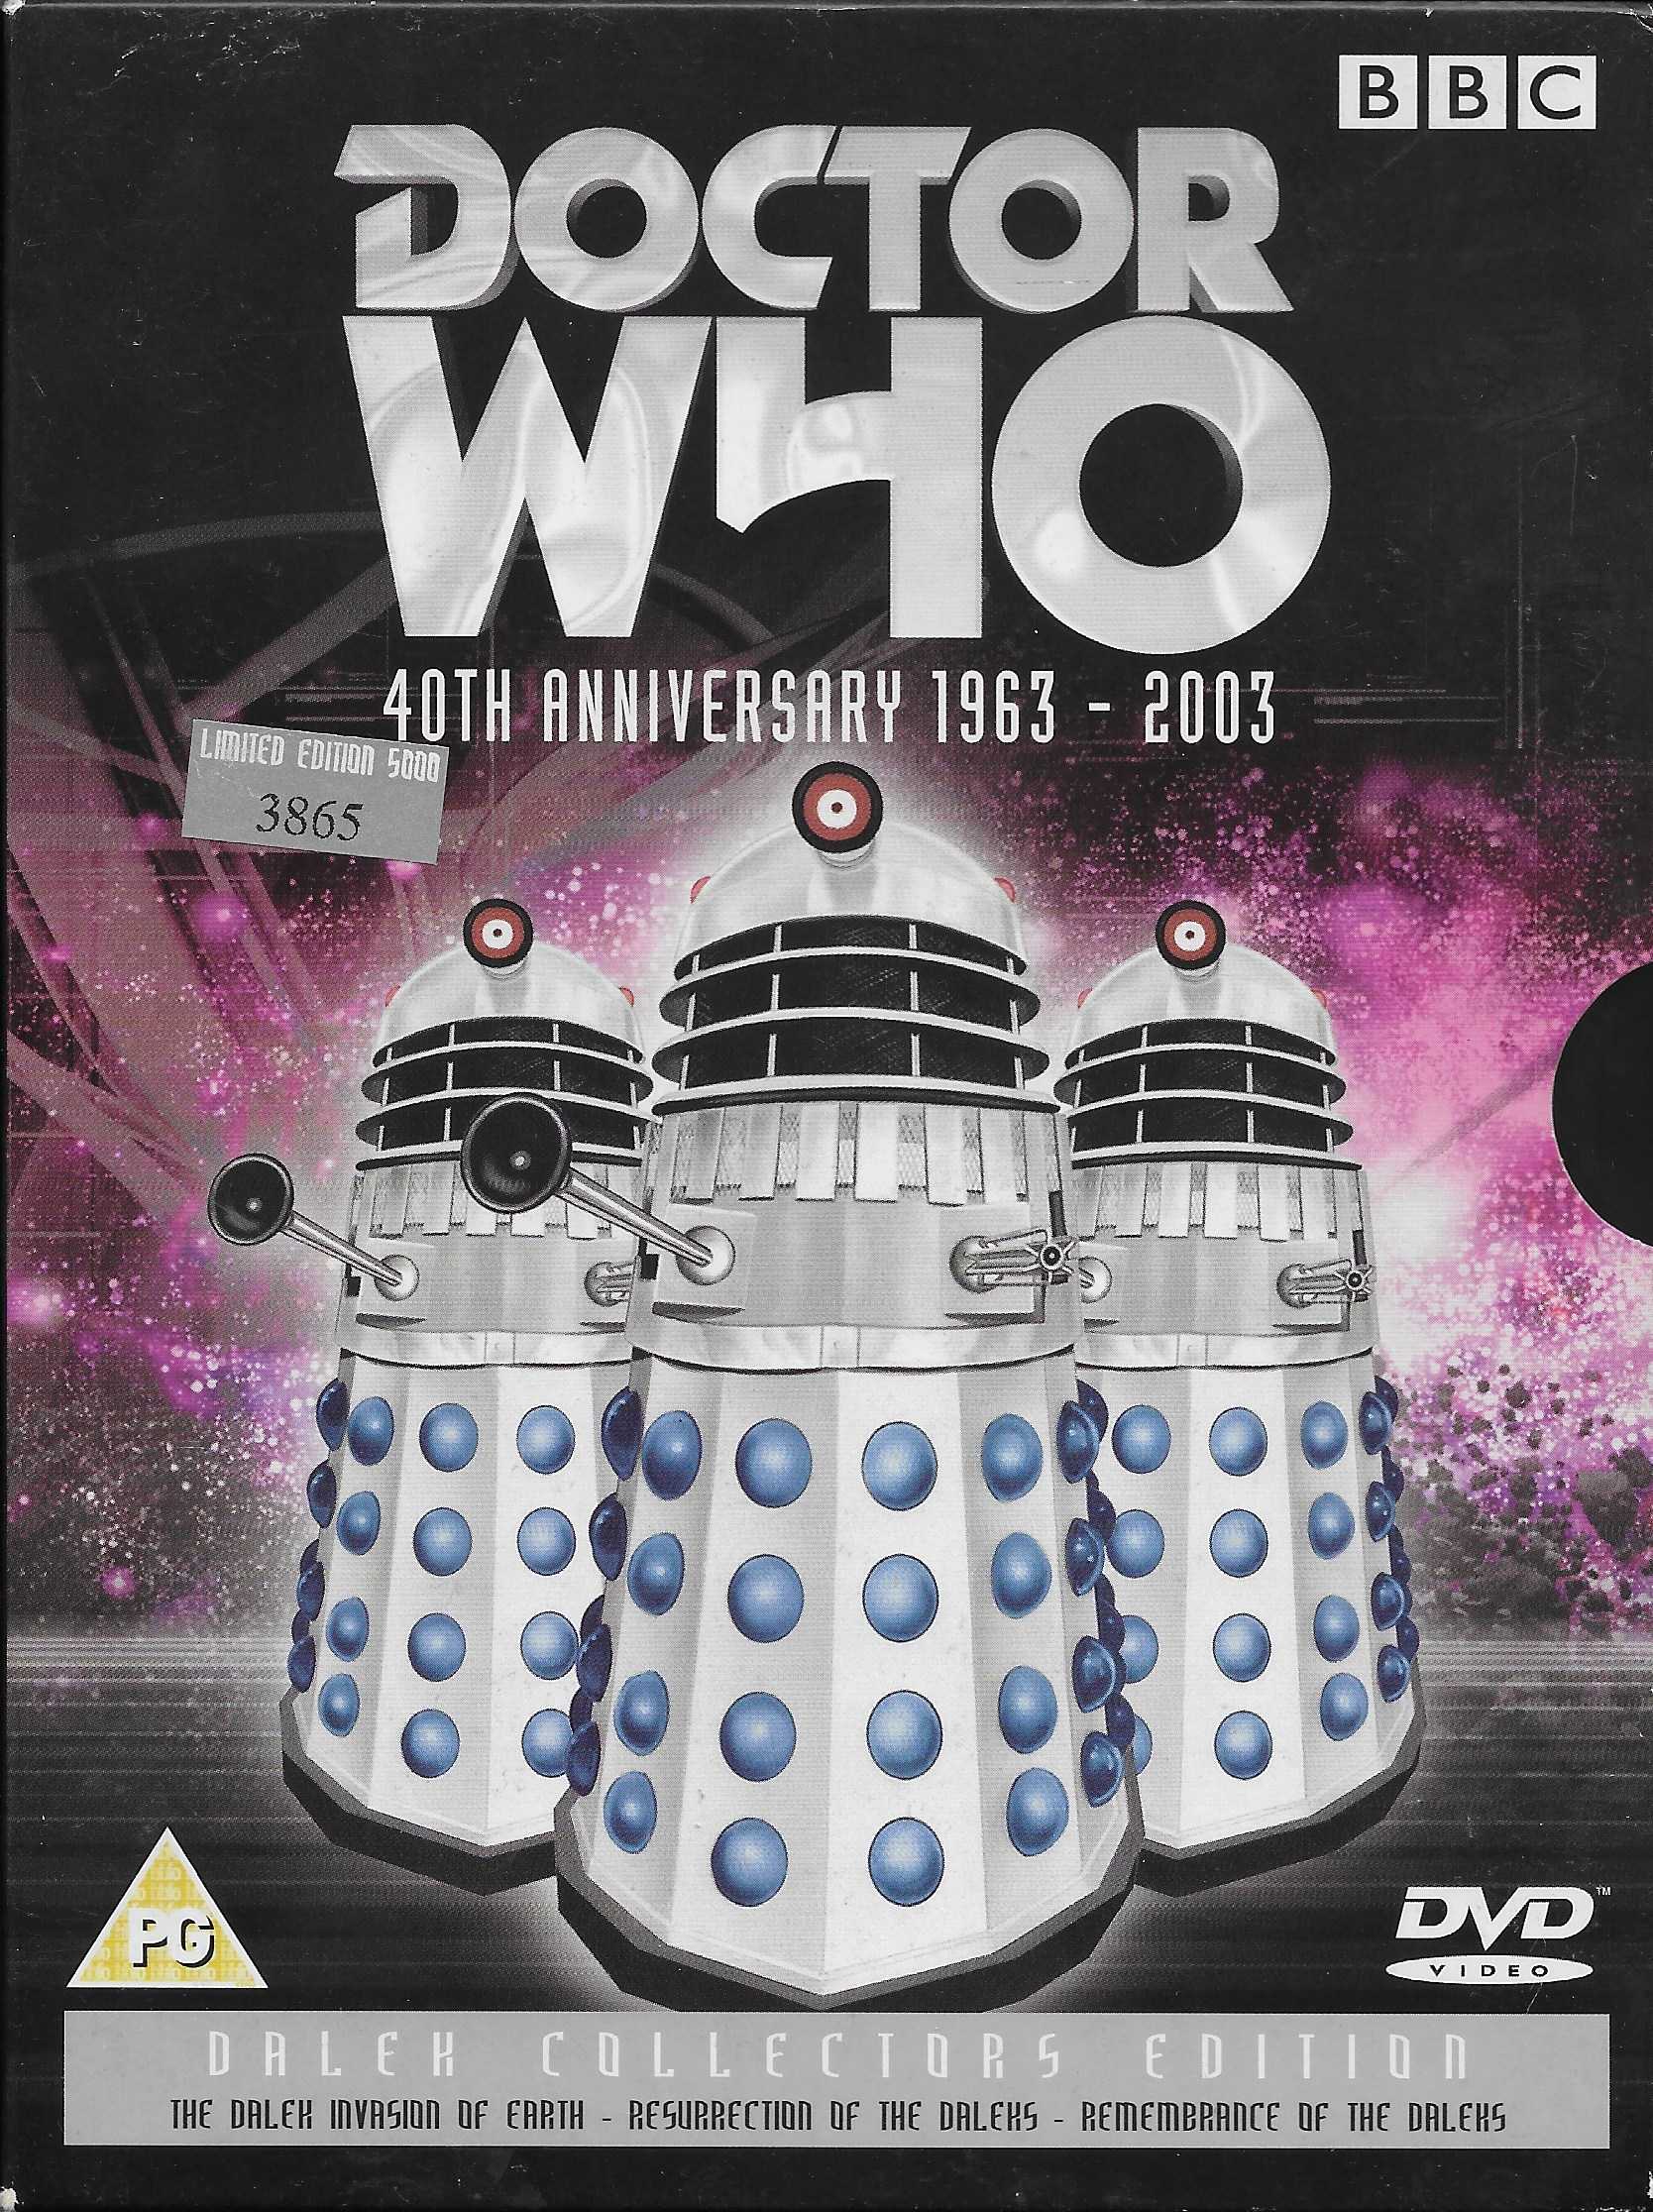 Picture of BBCDVD 1384 Doctor Who - Dalek collectors edition by artist Terry Nation / Eric Saward / Ben Aaronovitch from the BBC dvds - Records and Tapes library